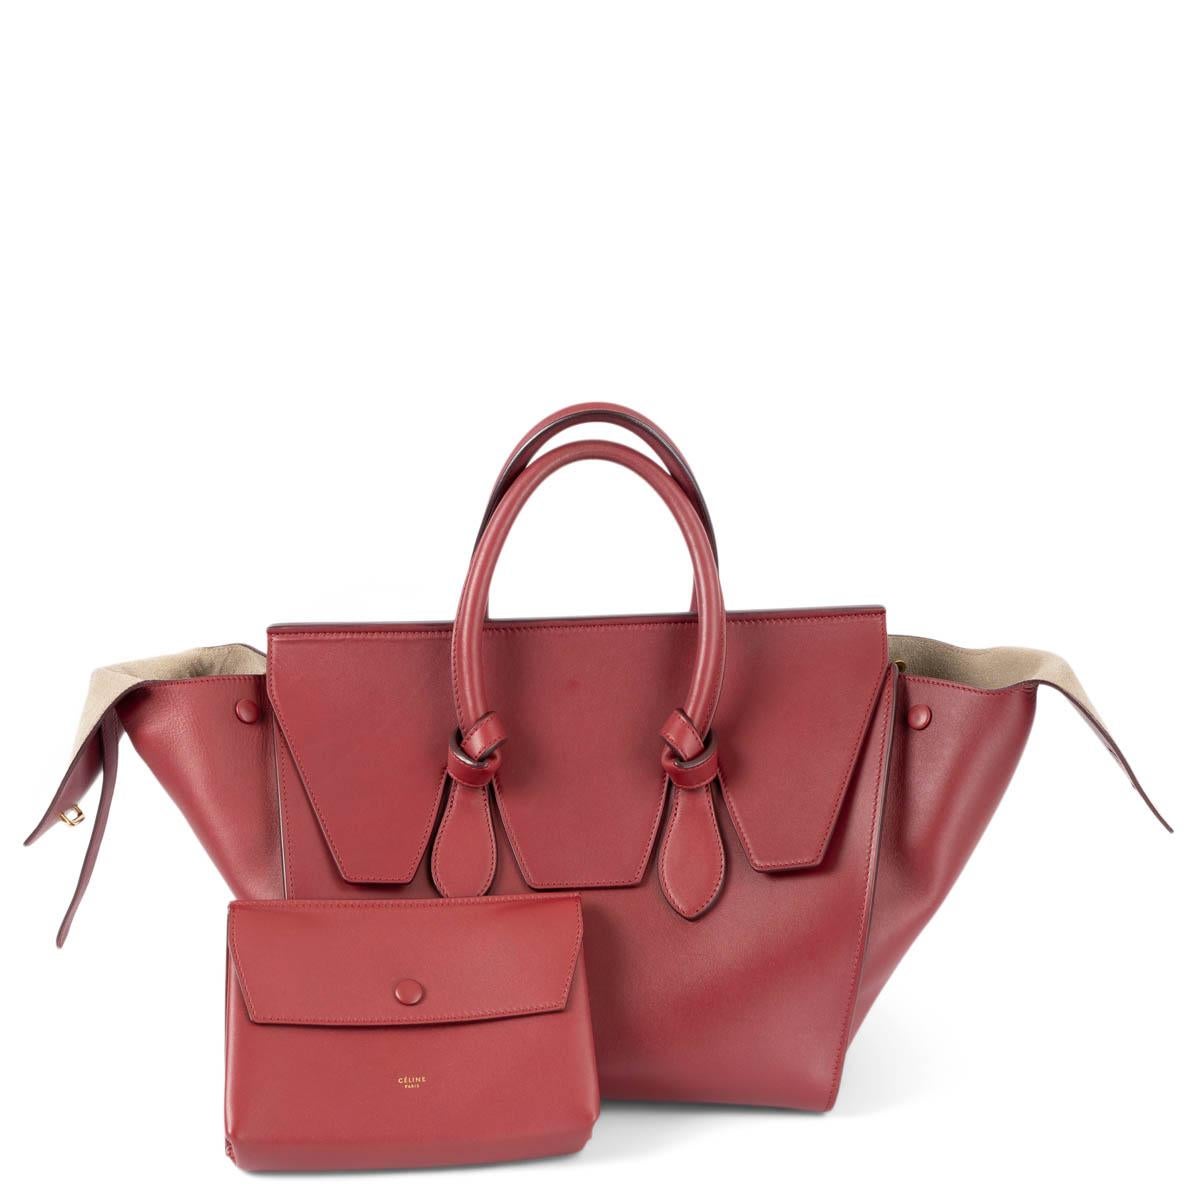 Women's CELINE burgundy leather SMALL TIE Tote Bag For Sale